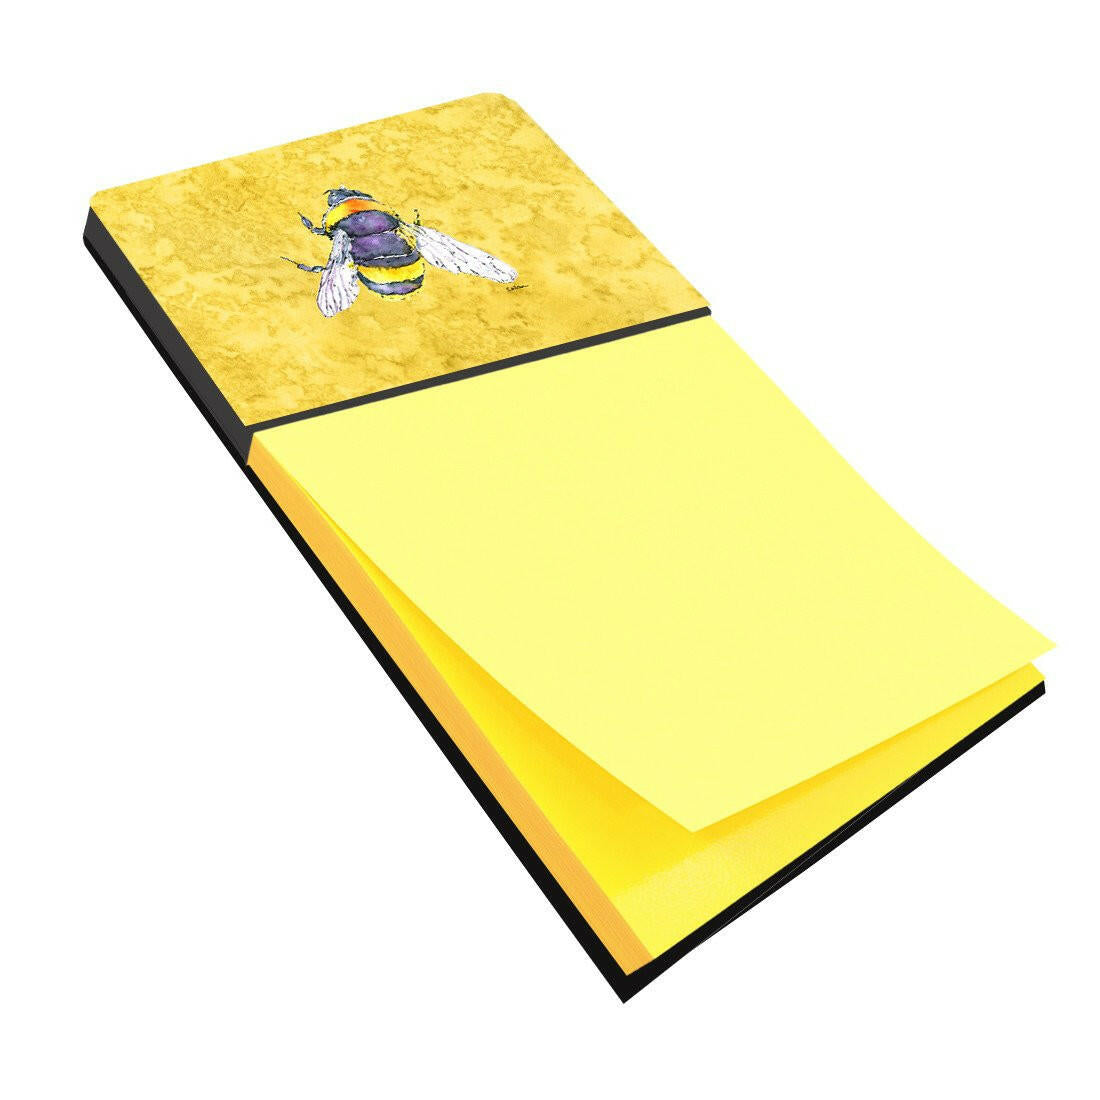 Bee on Yellow Refiillable Sticky Note Holder or Postit Note Dispenser 8852SN by Caroline's Treasures